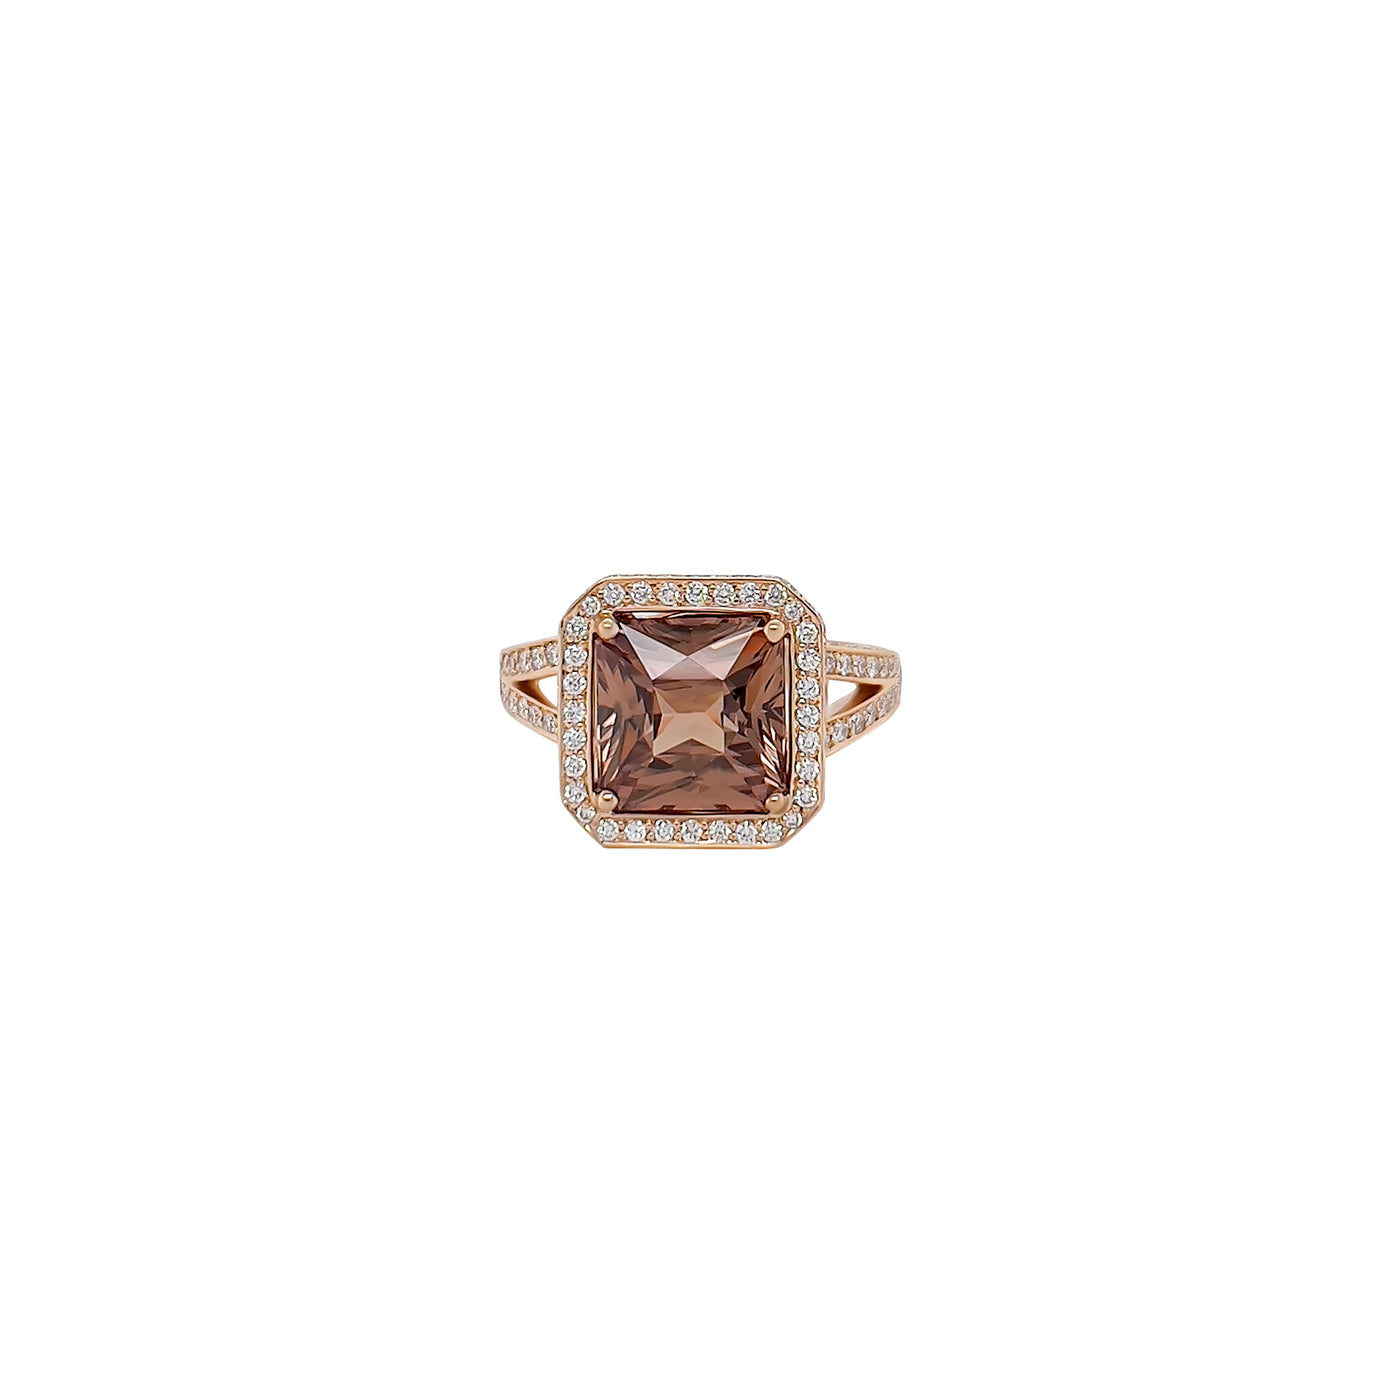 Natural Honey Brown Zircon and Diamond Ring in Rose Gold